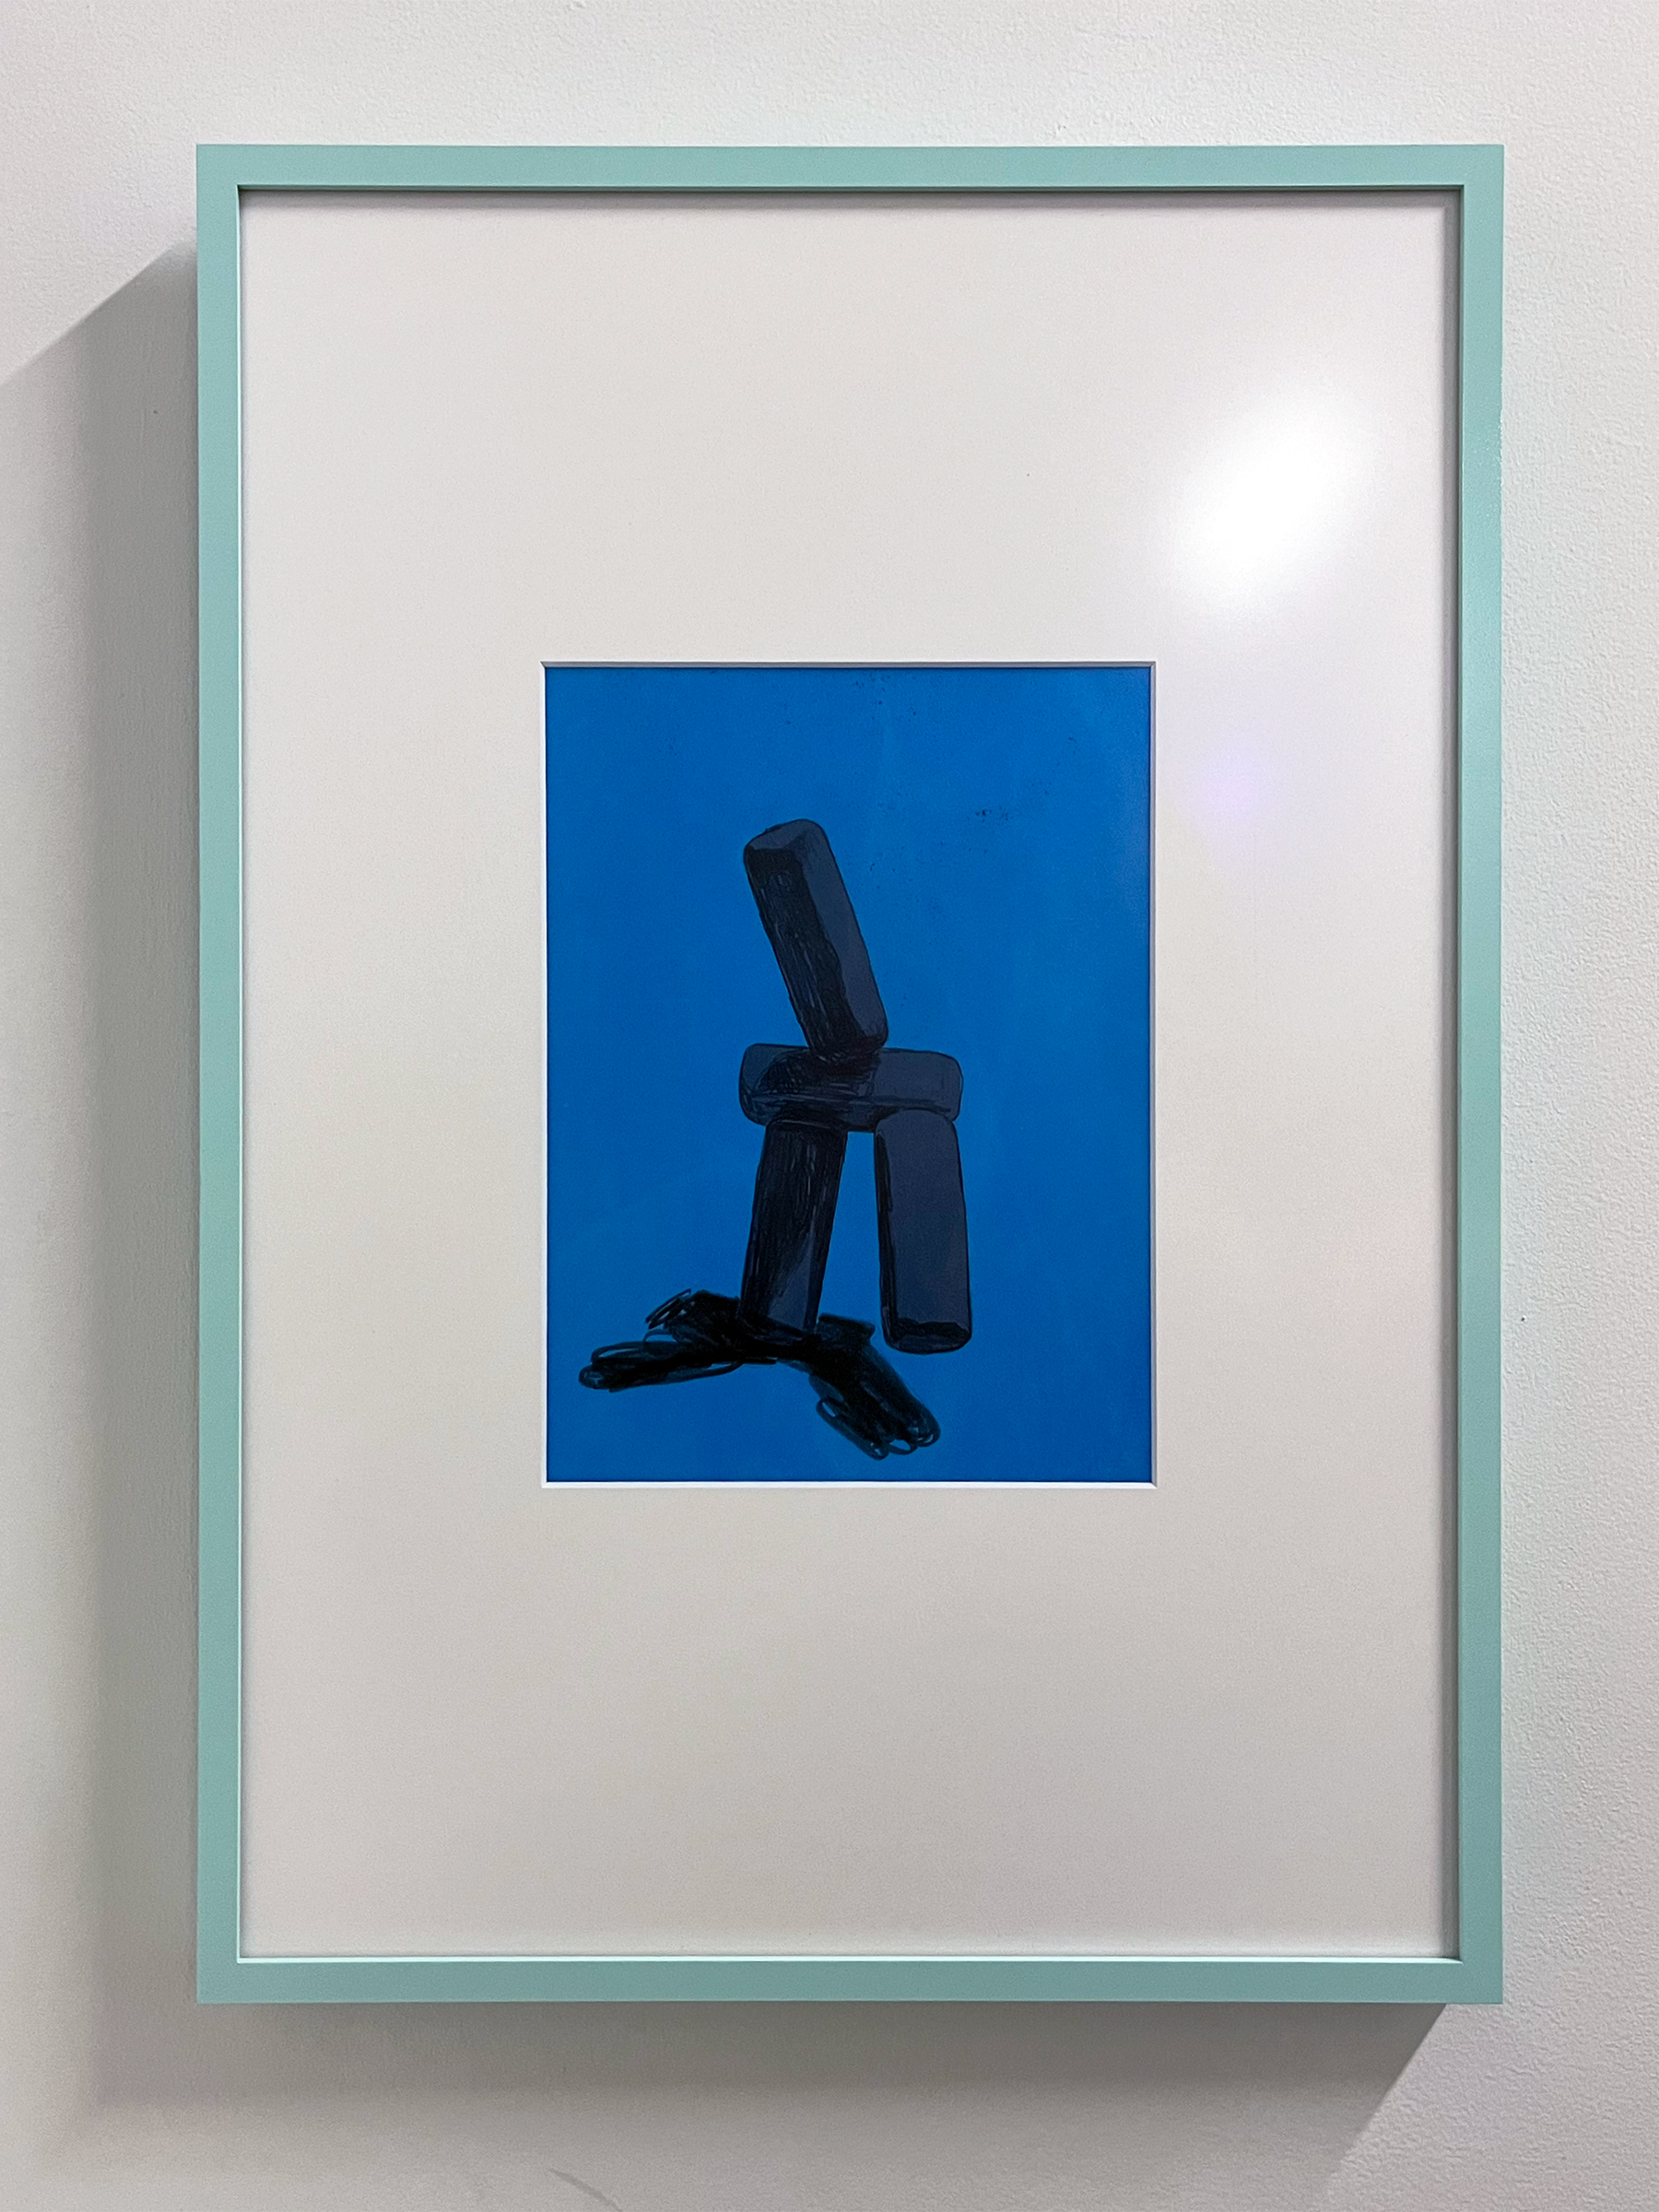 A photograph of a dark blue, abstract drawing with a white mat in a sky blue frame. The frame hangs on a white wall.